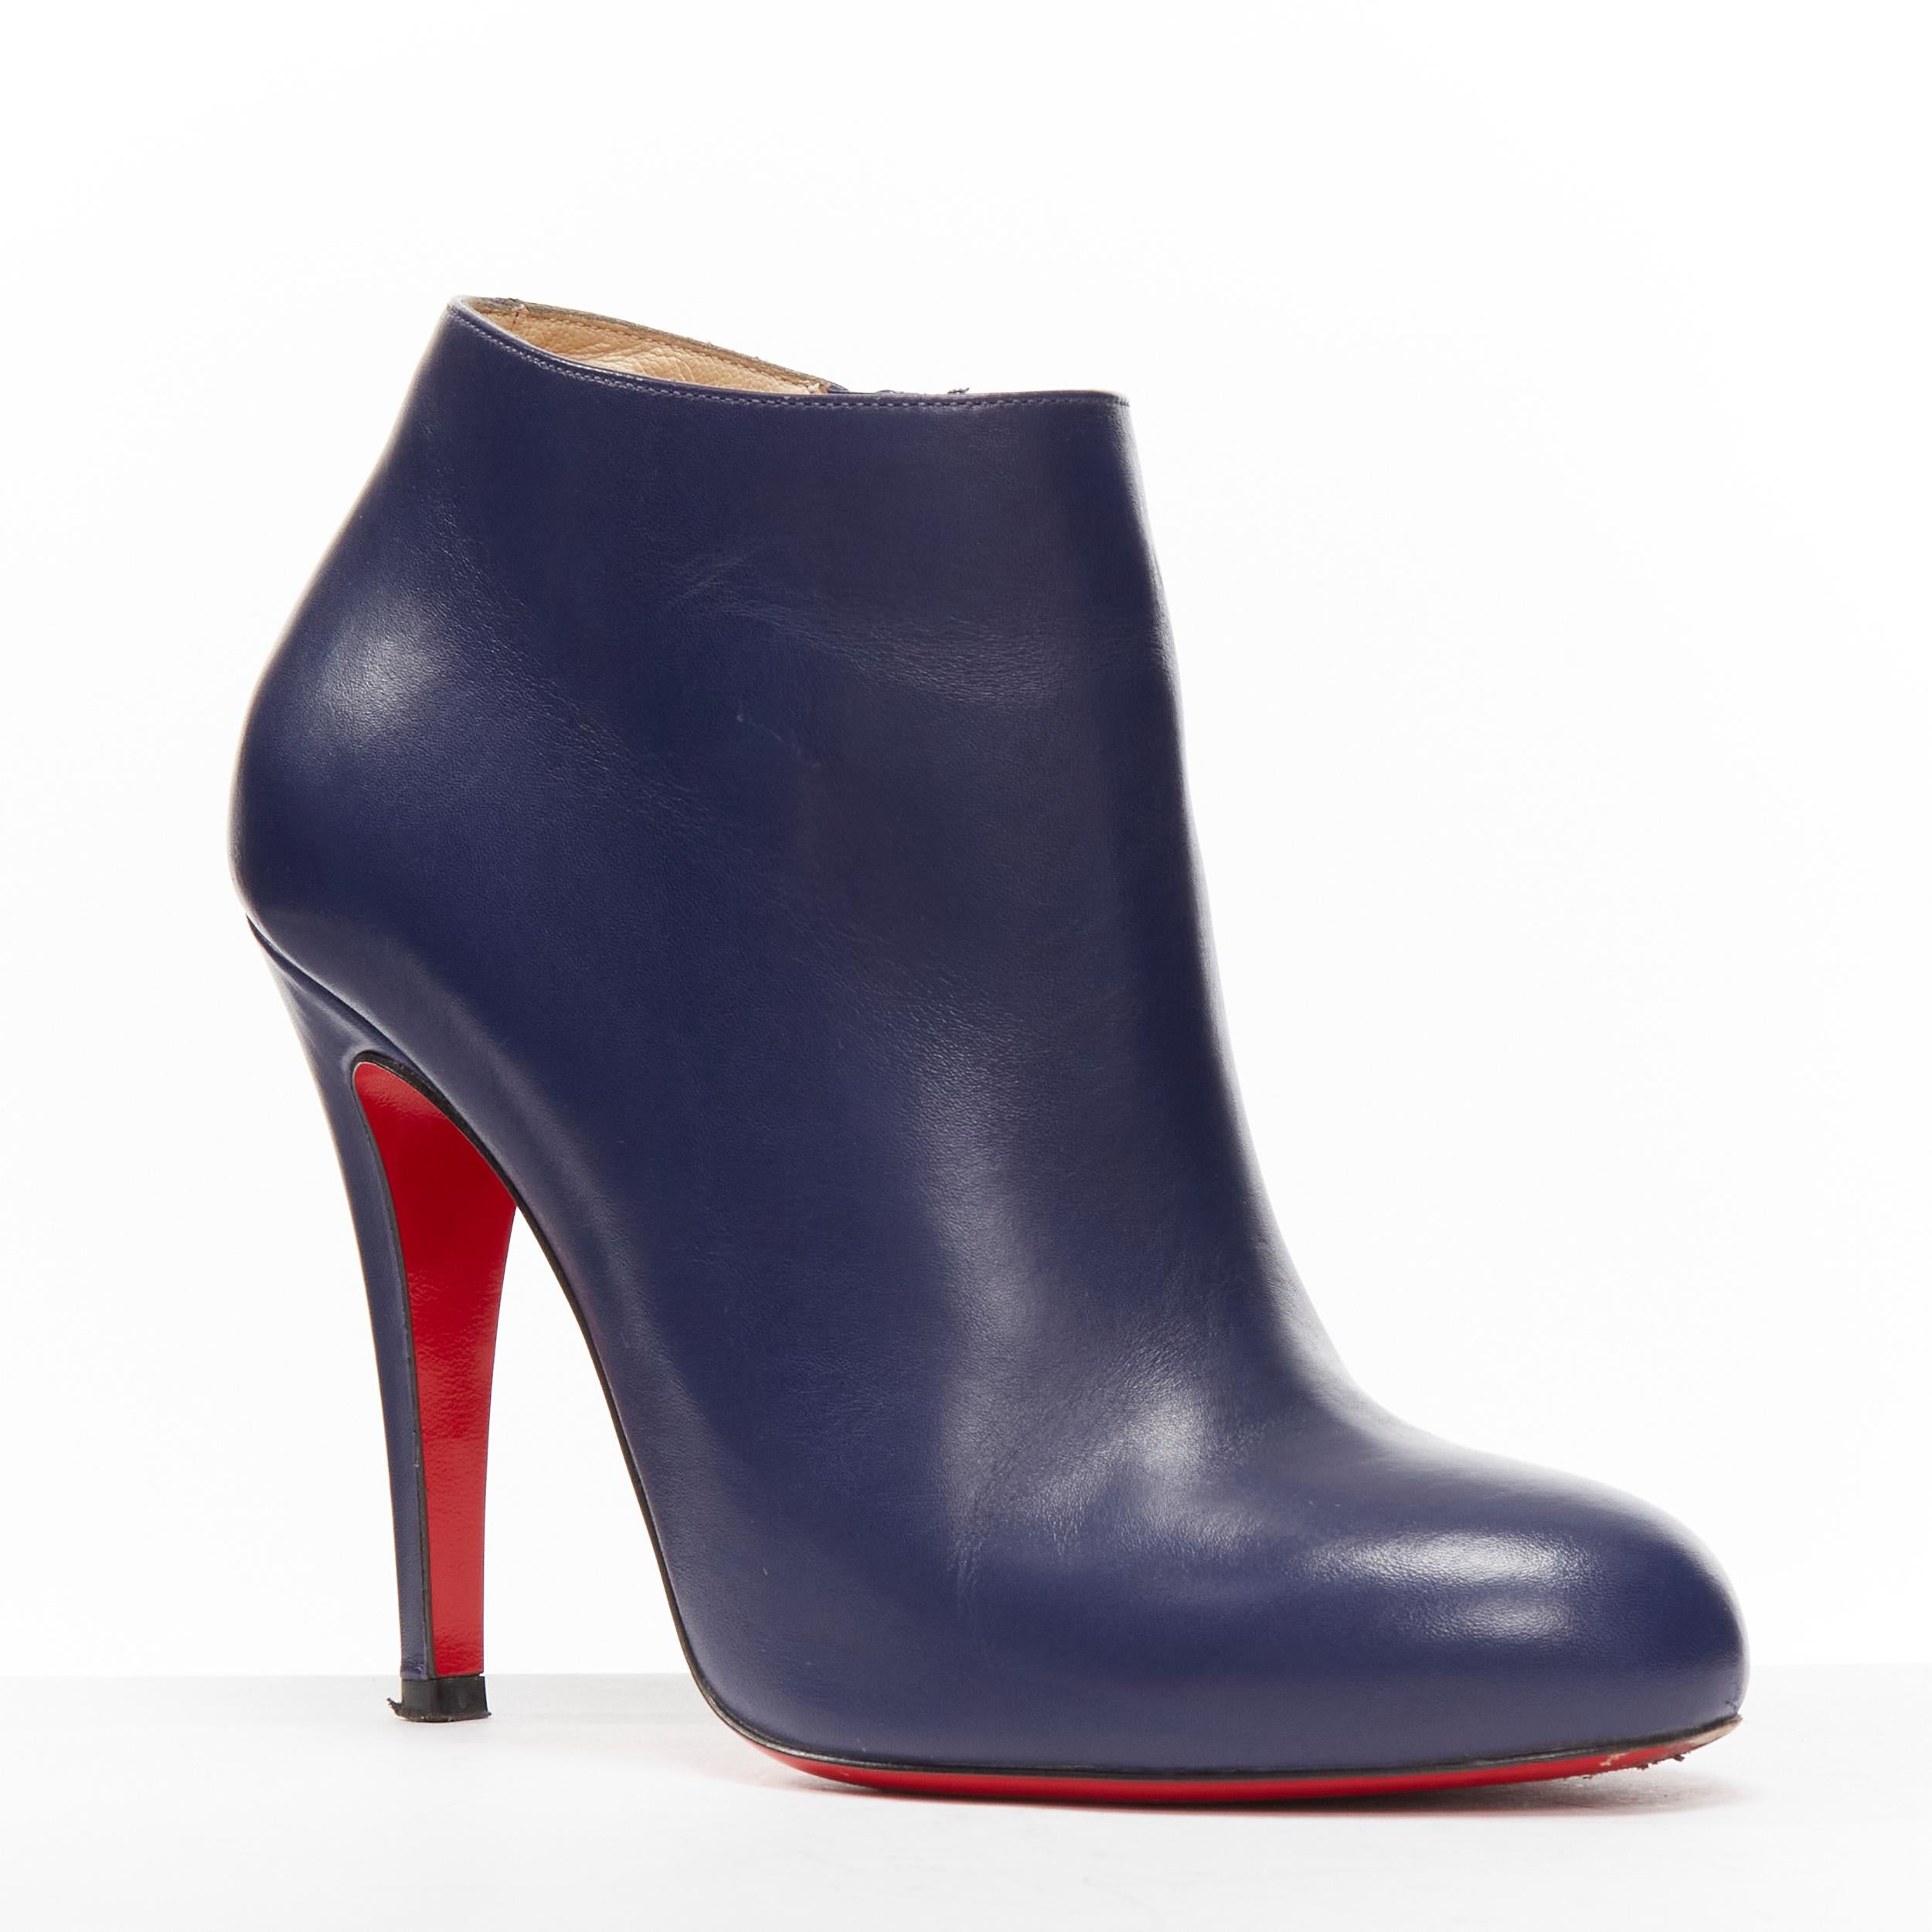 CHRISTIAN LOUBOUTIN Belle 100 navy blue high heel ankle boots EU37 US7
Reference: TGAS/D00165
Brand: Christian Louboutin
Model: Belle 100
Material: Leather
Color: Navy
Pattern: Solid
Closure: Zip
Lining: Nude Leather
Extra Details: Inside zip.
Made